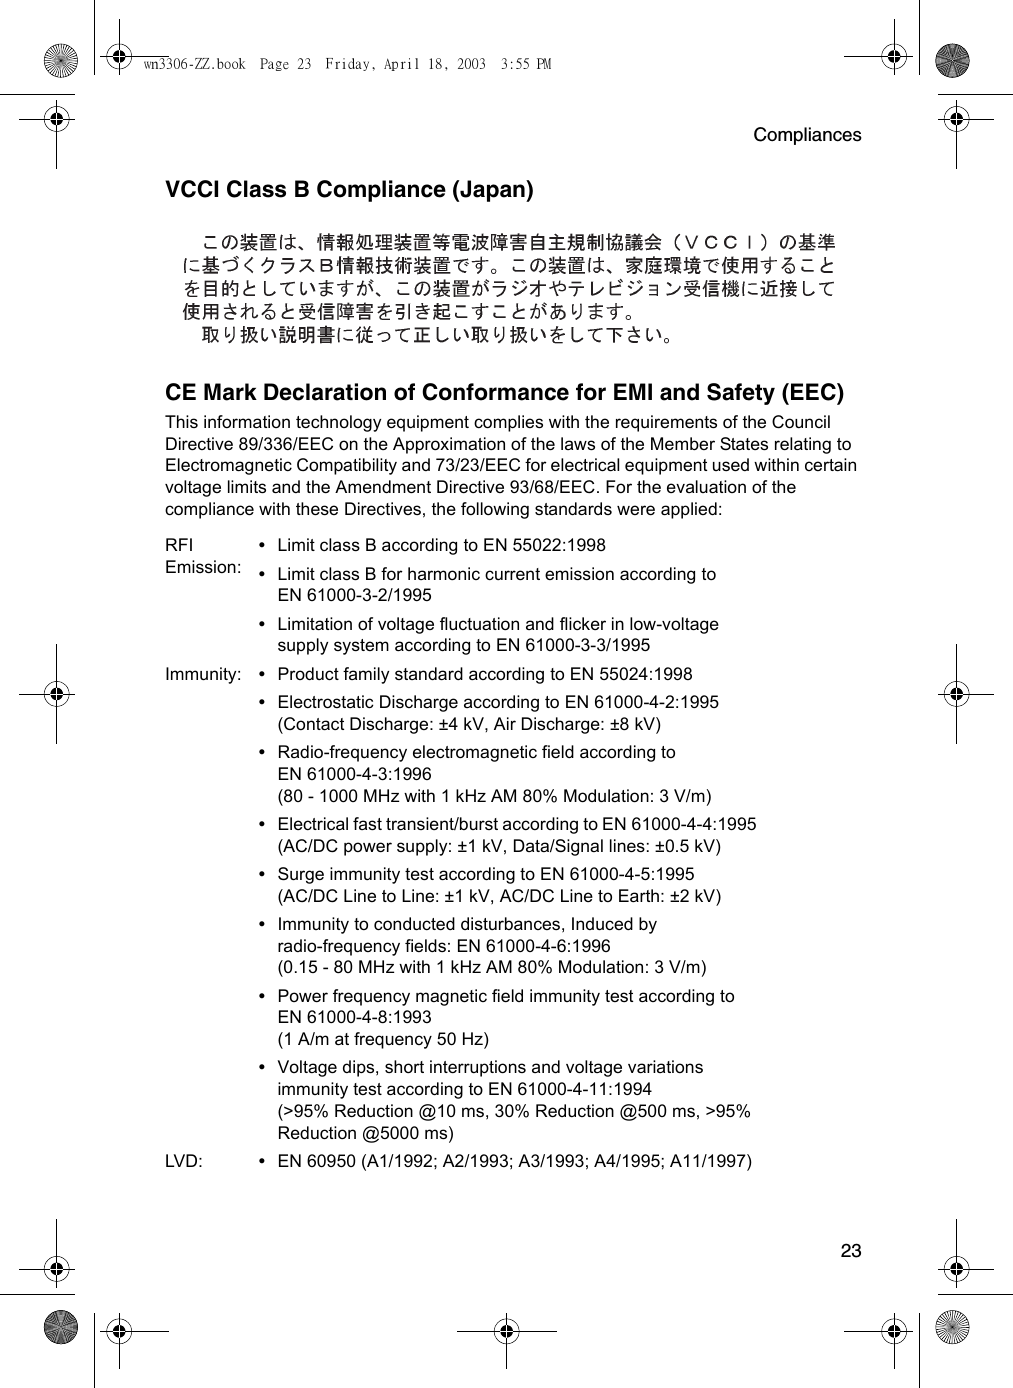 Compliances23VCCI Class B Compliance (Japan)CE Mark Declaration of Conformance for EMI and Safety (EEC)This information technology equipment complies with the requirements of the Council Directive 89/336/EEC on the Approximation of the laws of the Member States relating to Electromagnetic Compatibility and 73/23/EEC for electrical equipment used within certain voltage limits and the Amendment Directive 93/68/EEC. For the evaluation of the compliance with these Directives, the following standards were applied:RFI Emission:•Limit class B according to EN 55022:1998•Limit class B for harmonic current emission according to EN 61000-3-2/1995•Limitation of voltage fluctuation and flicker in low-voltage supply system according to EN 61000-3-3/1995Immunity: •Product family standard according to EN 55024:1998•Electrostatic Discharge according to EN 61000-4-2:1995 (Contact Discharge: ±4 kV, Air Discharge: ±8 kV)•Radio-frequency electromagnetic field according to EN 61000-4-3:1996 (80 - 1000 MHz with 1 kHz AM 80% Modulation: 3 V/m)•Electrical fast transient/burst according to EN 61000-4-4:1995 (AC/DC power supply: ±1 kV, Data/Signal lines: ±0.5 kV)•Surge immunity test according to EN 61000-4-5:1995 (AC/DC Line to Line: ±1 kV, AC/DC Line to Earth: ±2 kV)•Immunity to conducted disturbances, Induced by radio-frequency fields: EN 61000-4-6:1996 (0.15 - 80 MHz with 1 kHz AM 80% Modulation: 3 V/m)•Power frequency magnetic field immunity test according to EN 61000-4-8:1993 (1 A/m at frequency 50 Hz)•Voltage dips, short interruptions and voltage variations immunity test according to EN 61000-4-11:1994 (&gt;95% Reduction @10 ms, 30% Reduction @500 ms, &gt;95% Reduction @5000 ms)LVD: •EN 60950 (A1/1992; A2/1993; A3/1993; A4/1995; A11/1997)wn3306-ZZ.book  Page 23  Friday, April 18, 2003  3:55 PM